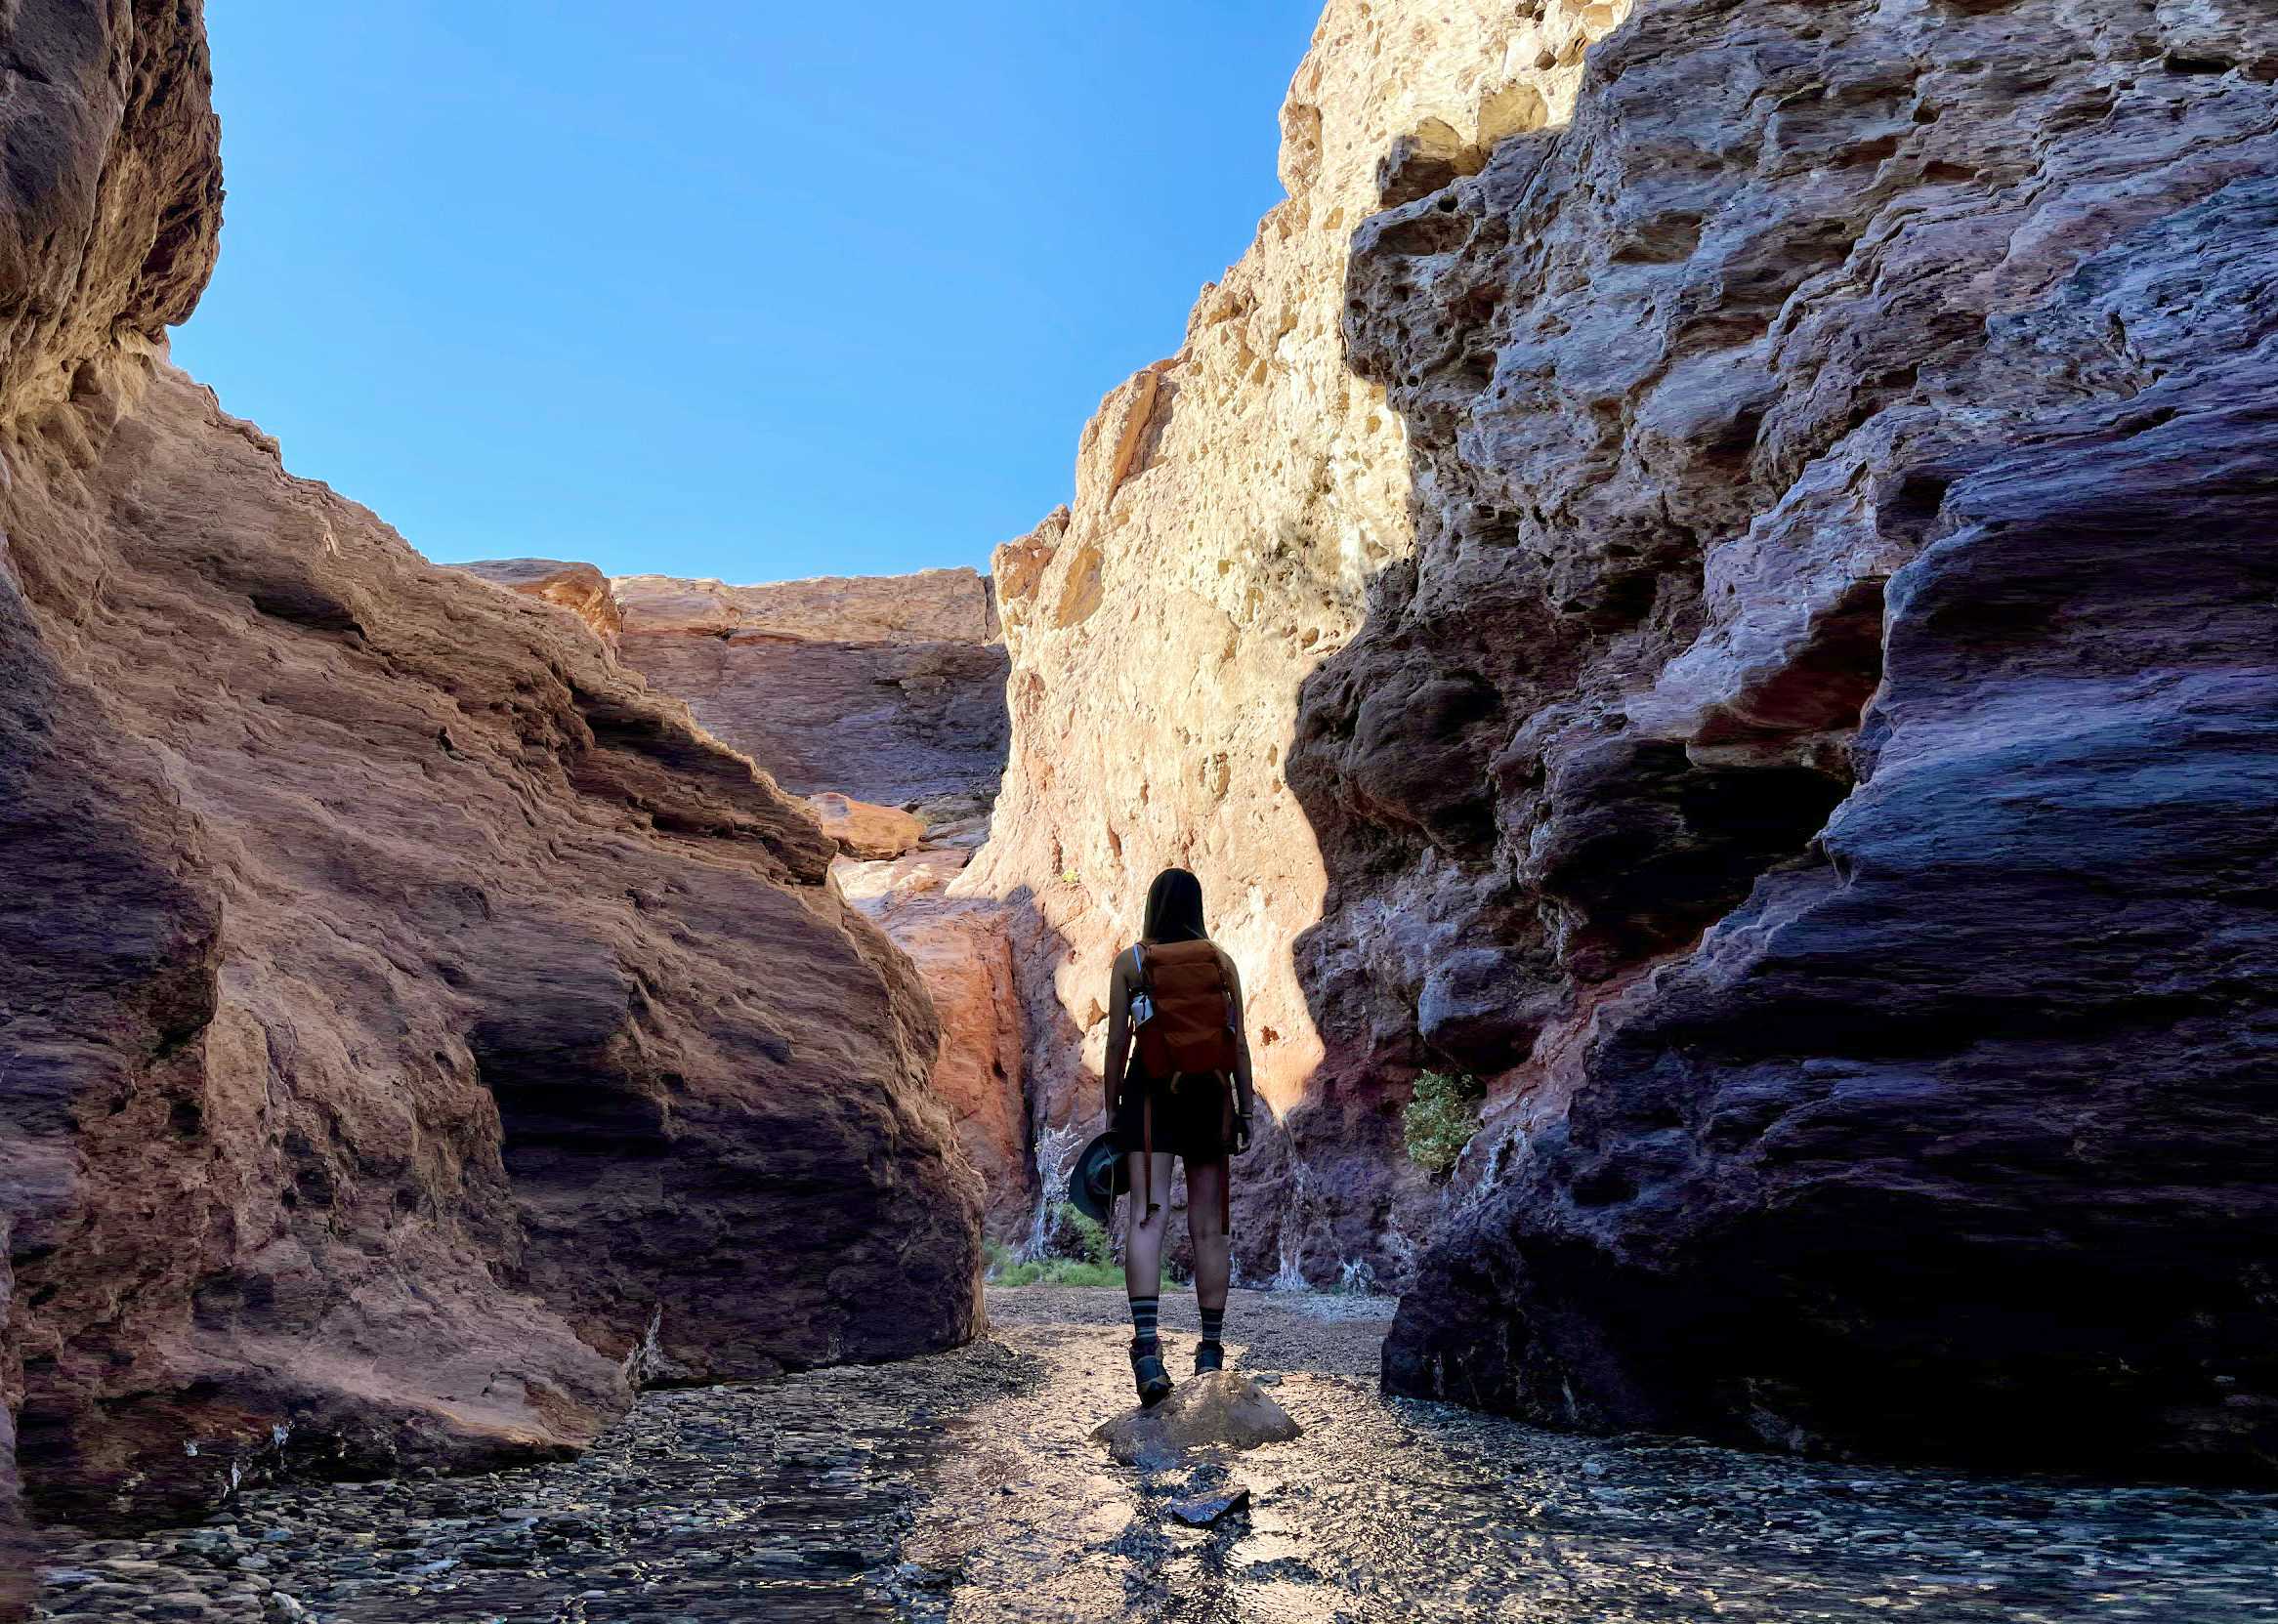 The Ultimate Guide for Hiking to the Arizona (Ringbolt) Hot Spring